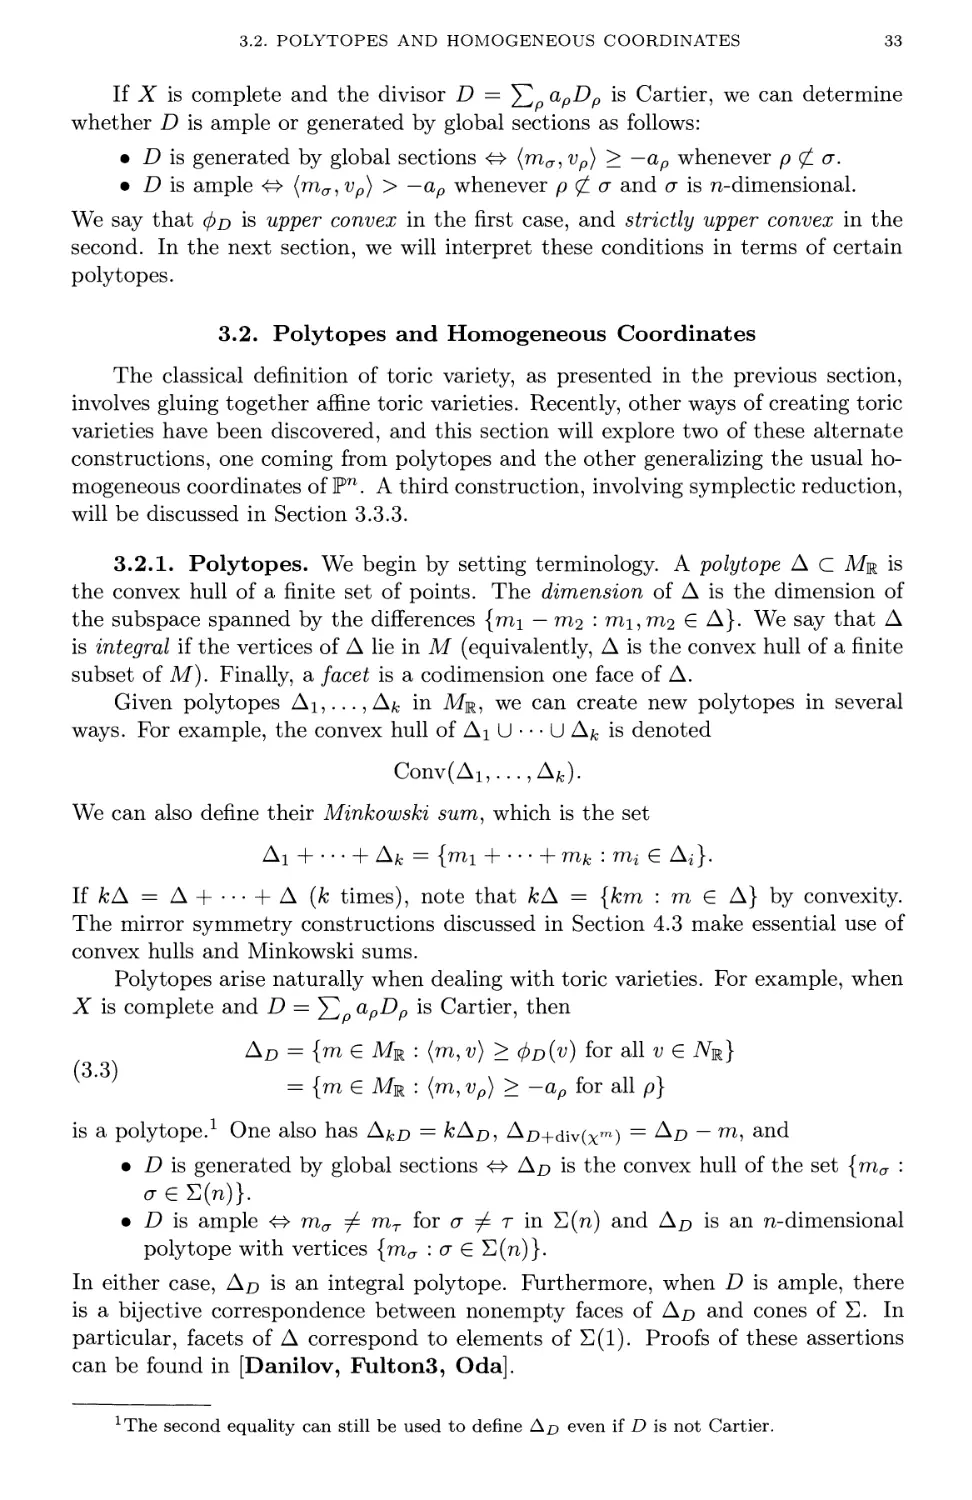 3.2. Polytopes and Homogeneous Coordinates